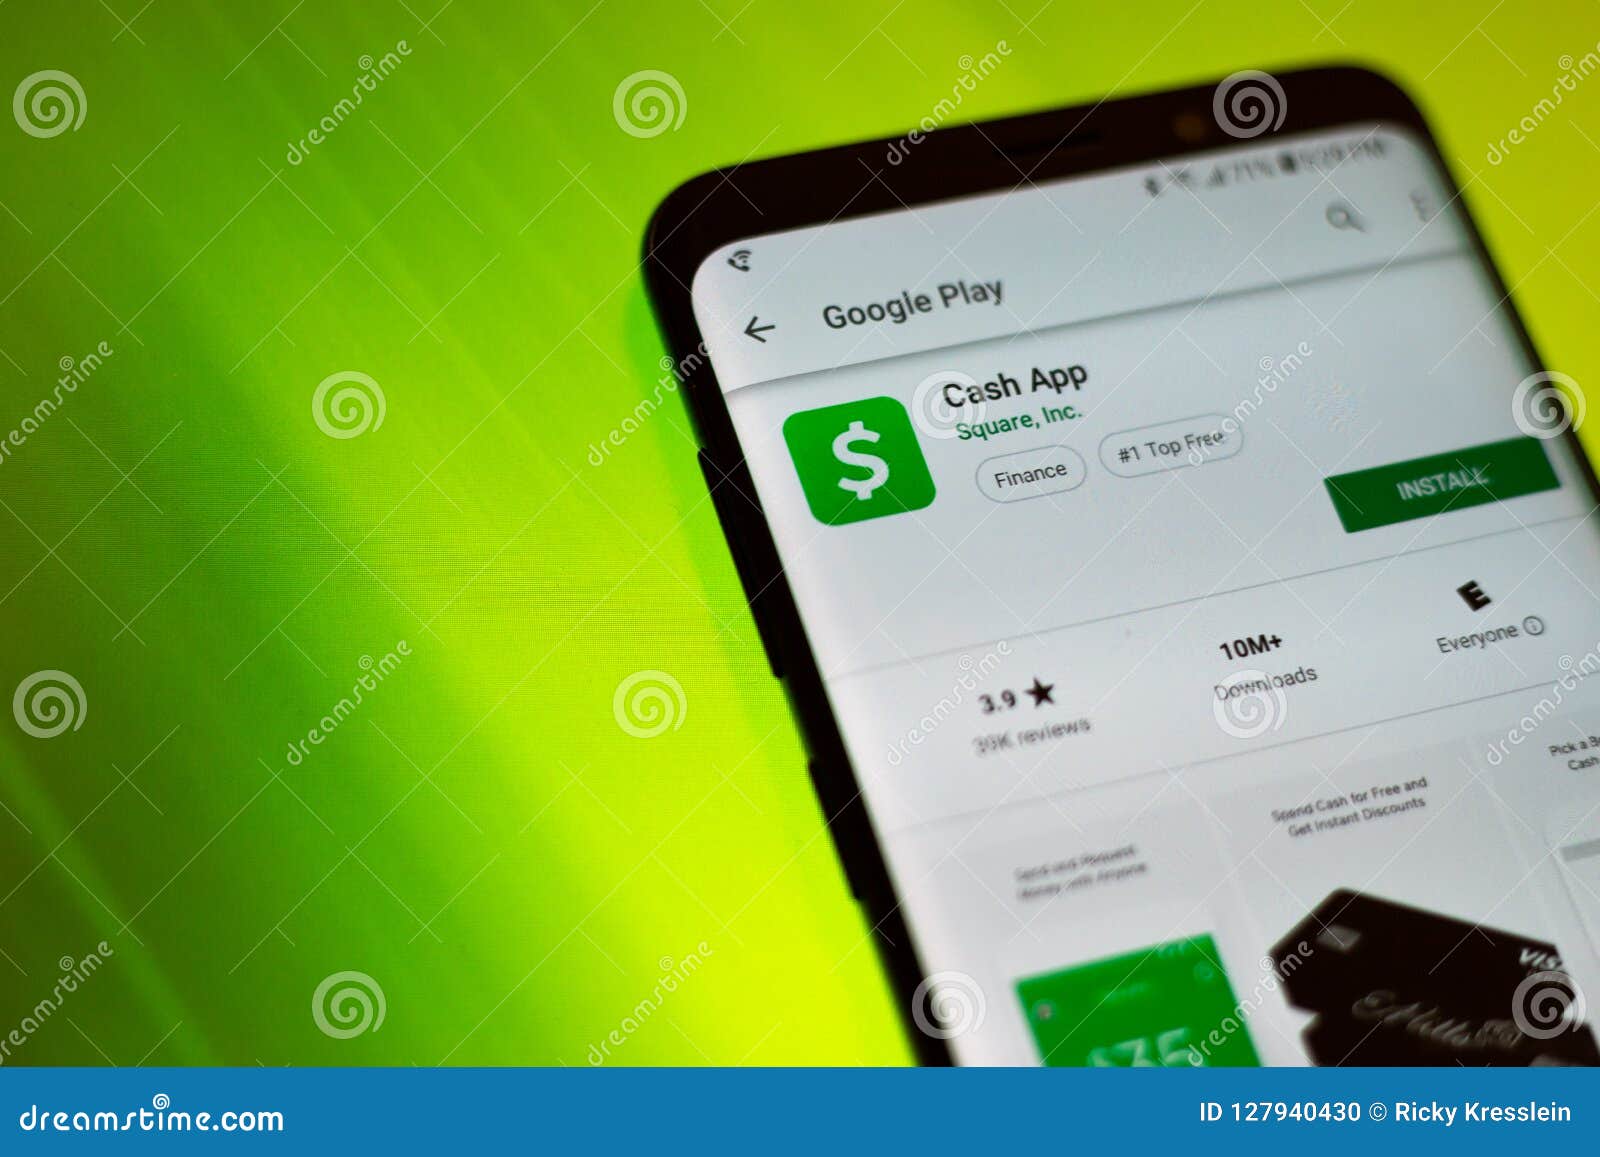 Cash App By Square Inc Google Play Install Page On Android ...